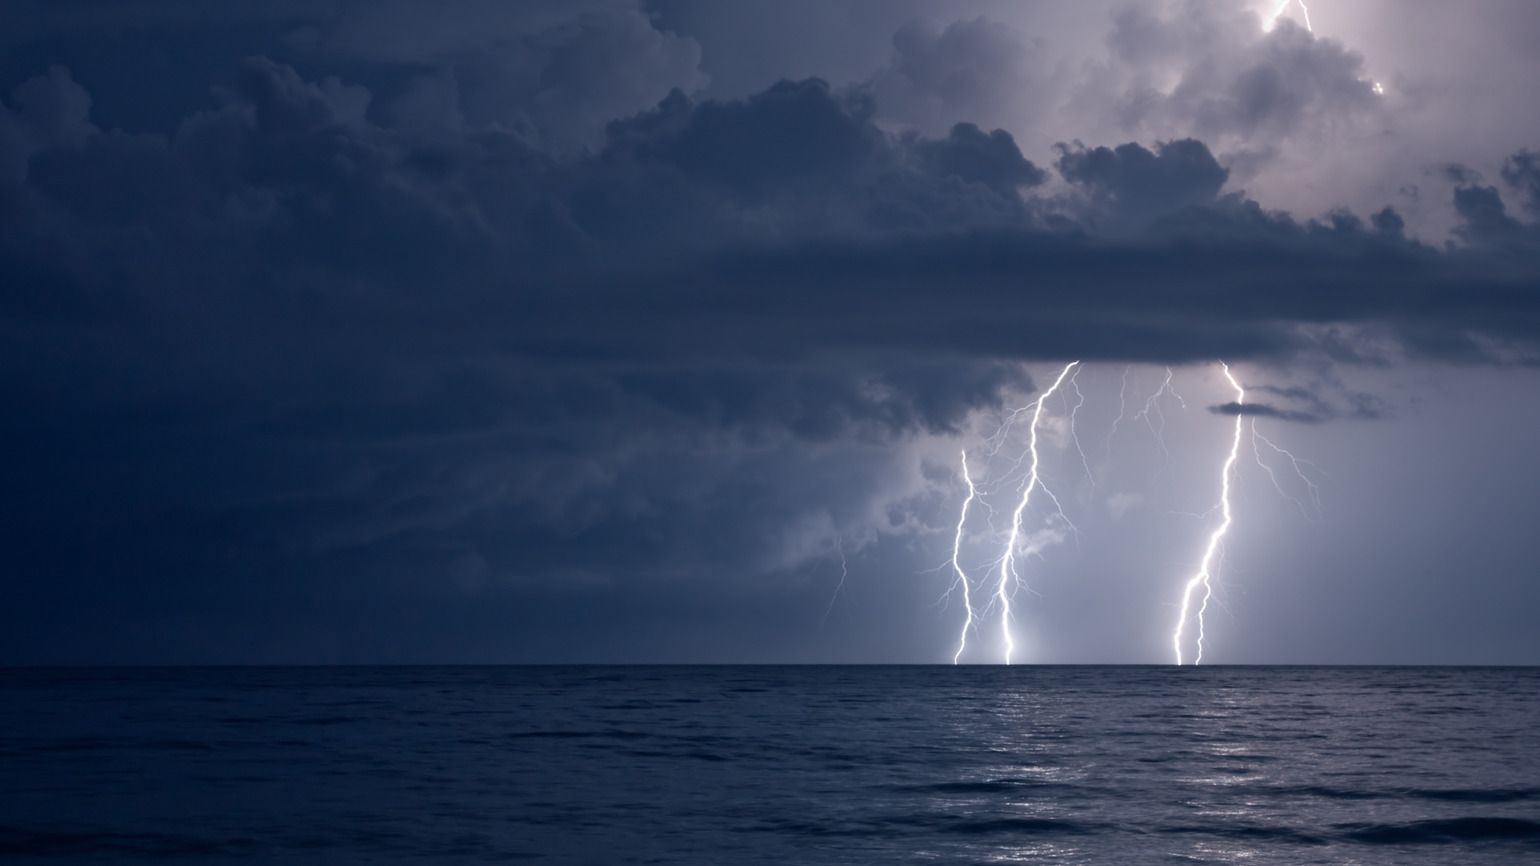 Lightning on an ocean at night is an example of God's hands